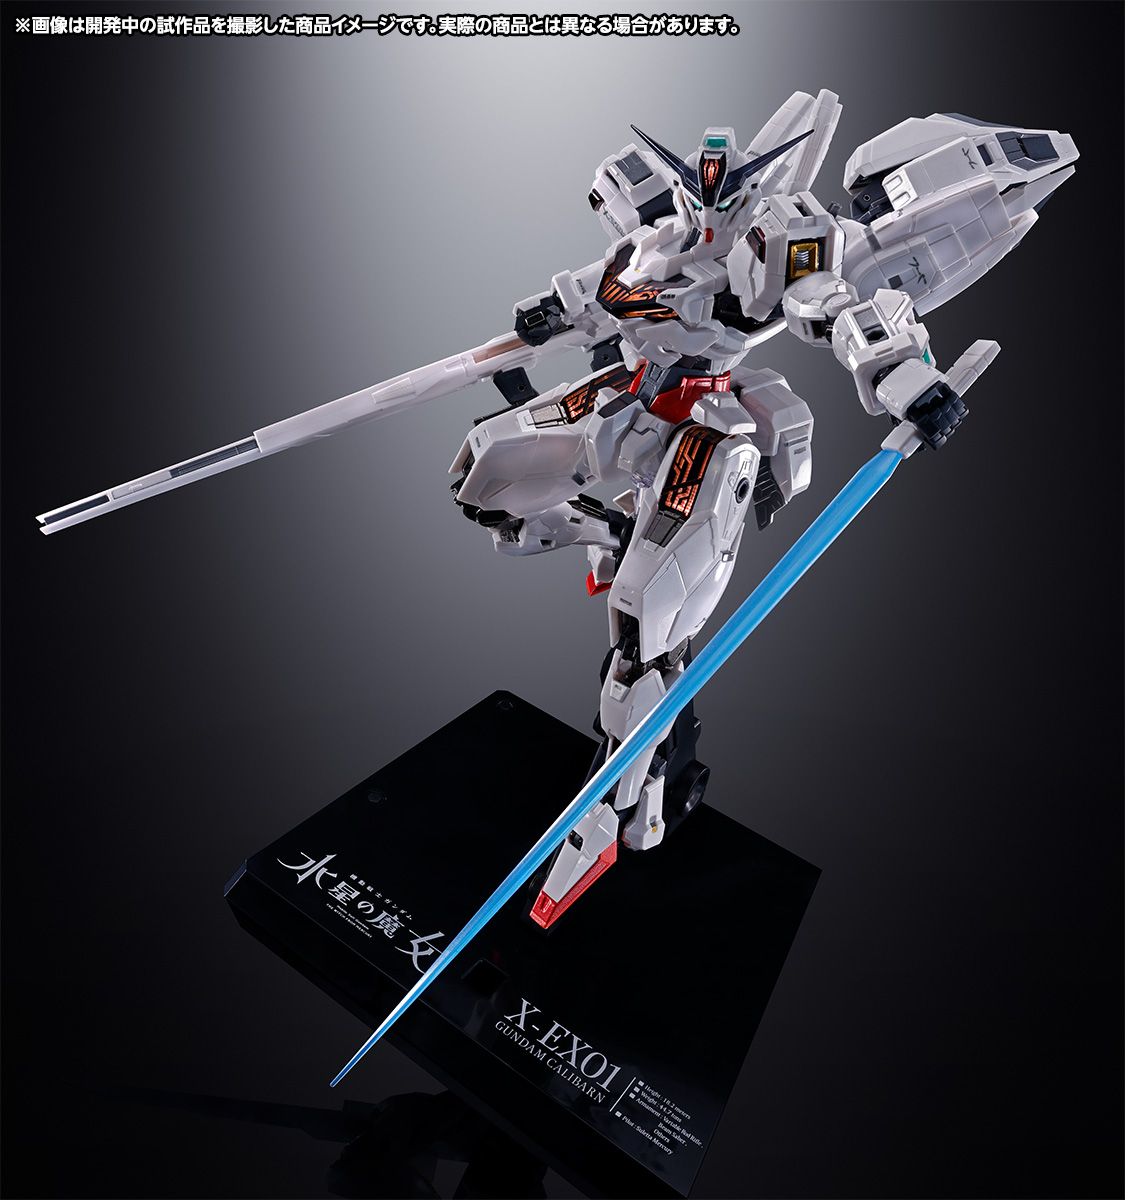 Introducing the latest samples of &quot;CHOGOKIN GUNDAM CALIBARN,&quot; with orders due on April 28th!